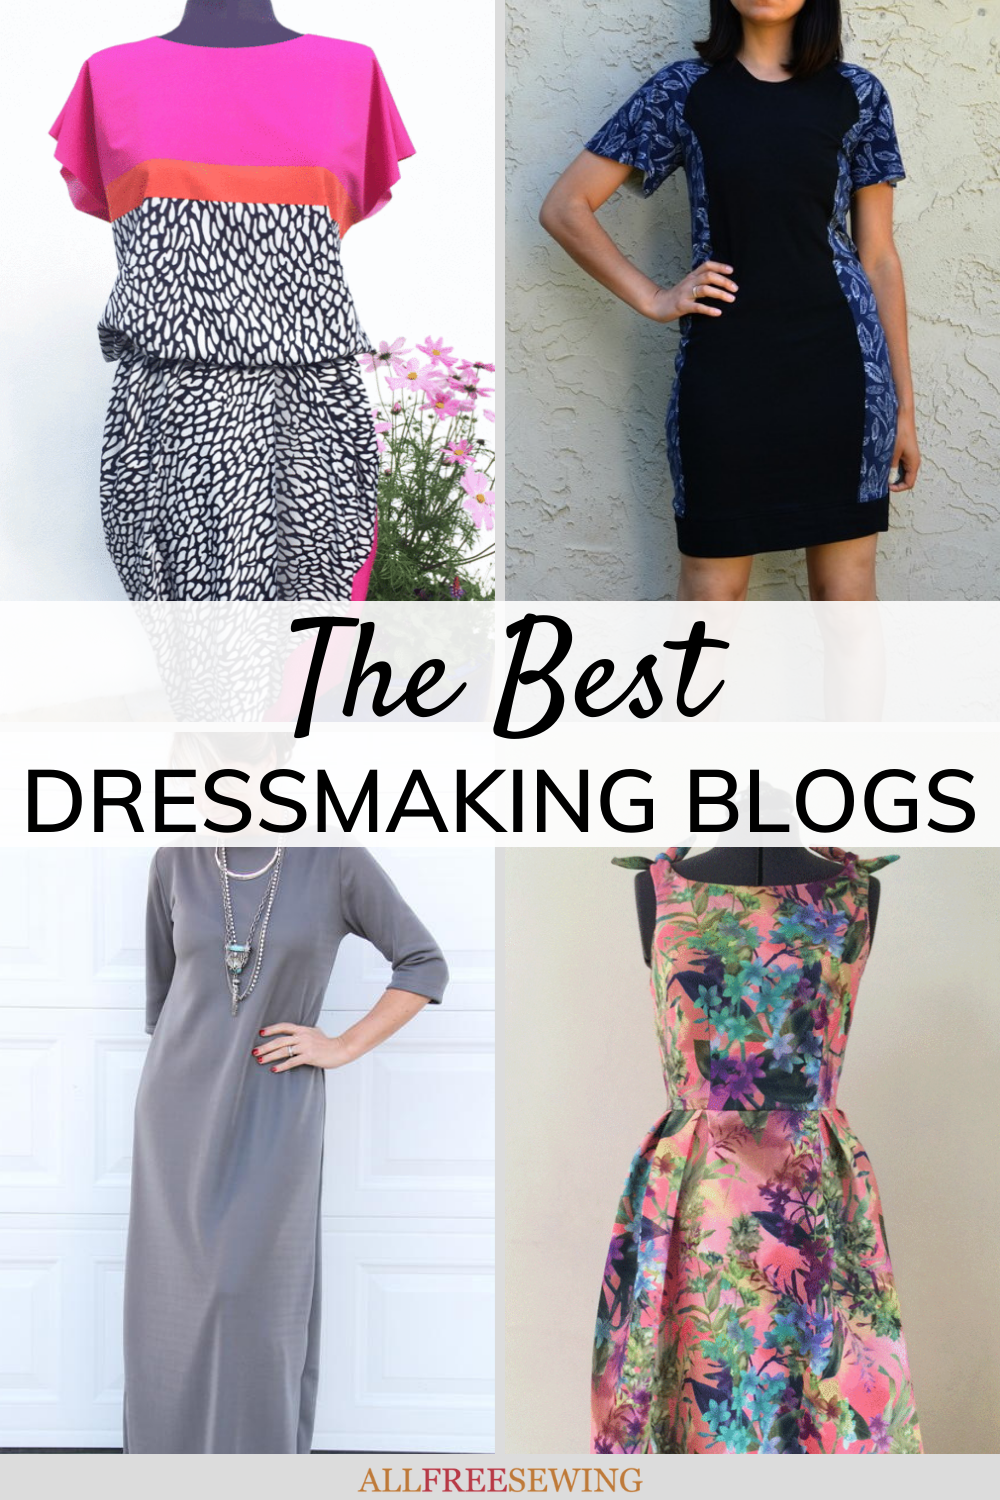 12 WAYS TO STYLE A BLACK DRESS - Lifestyle Blog by Leanne Barlow